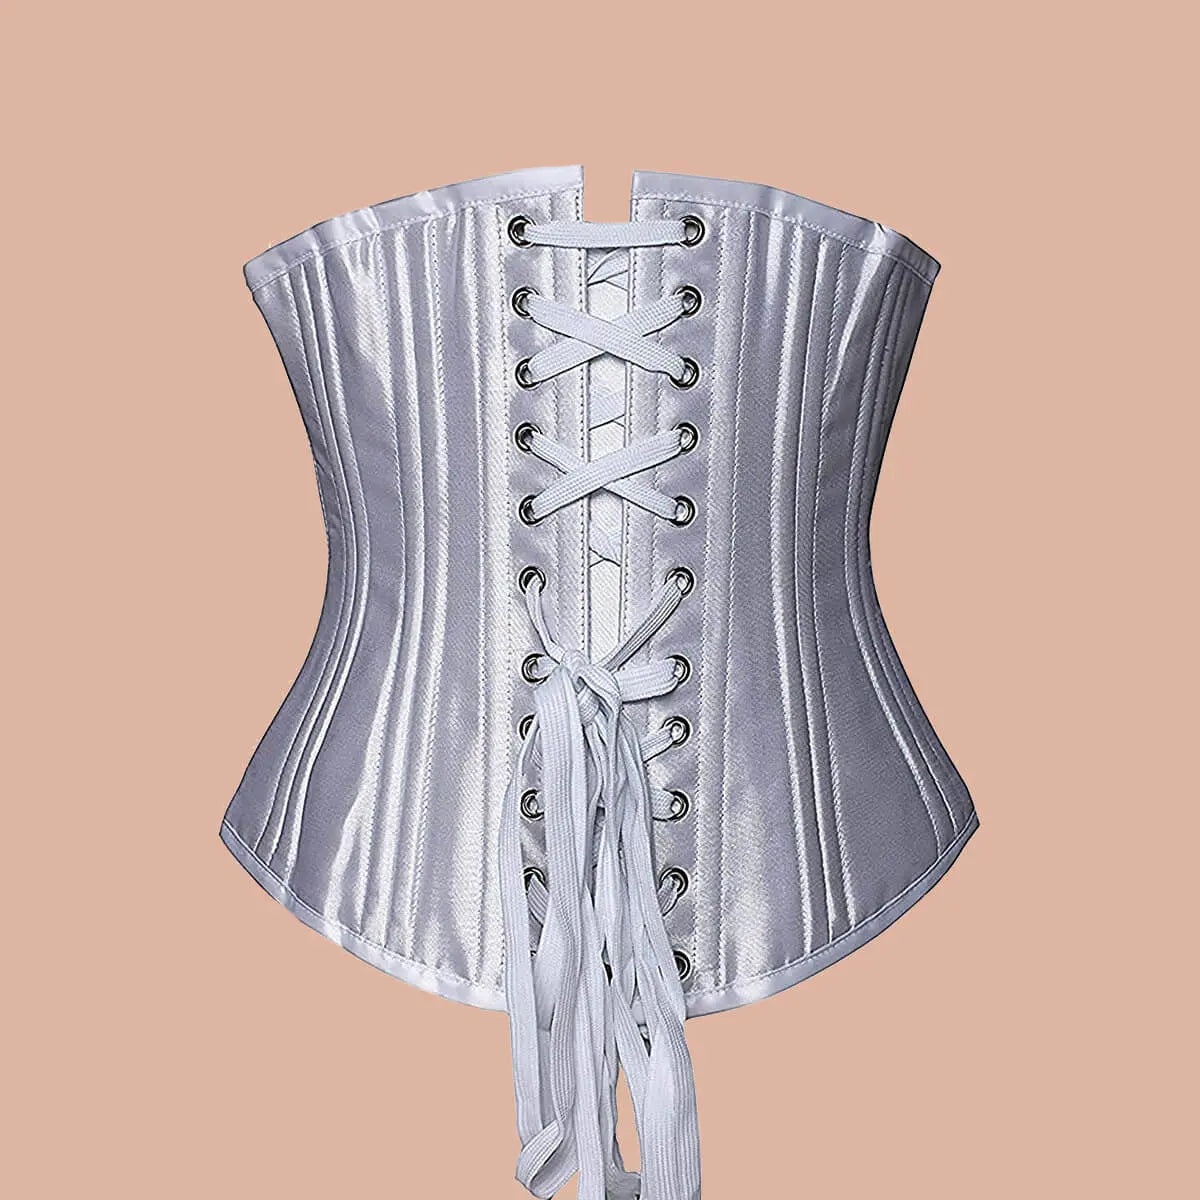 Find Cheap, Fashionable and Slimming cheap steel boned corsets 